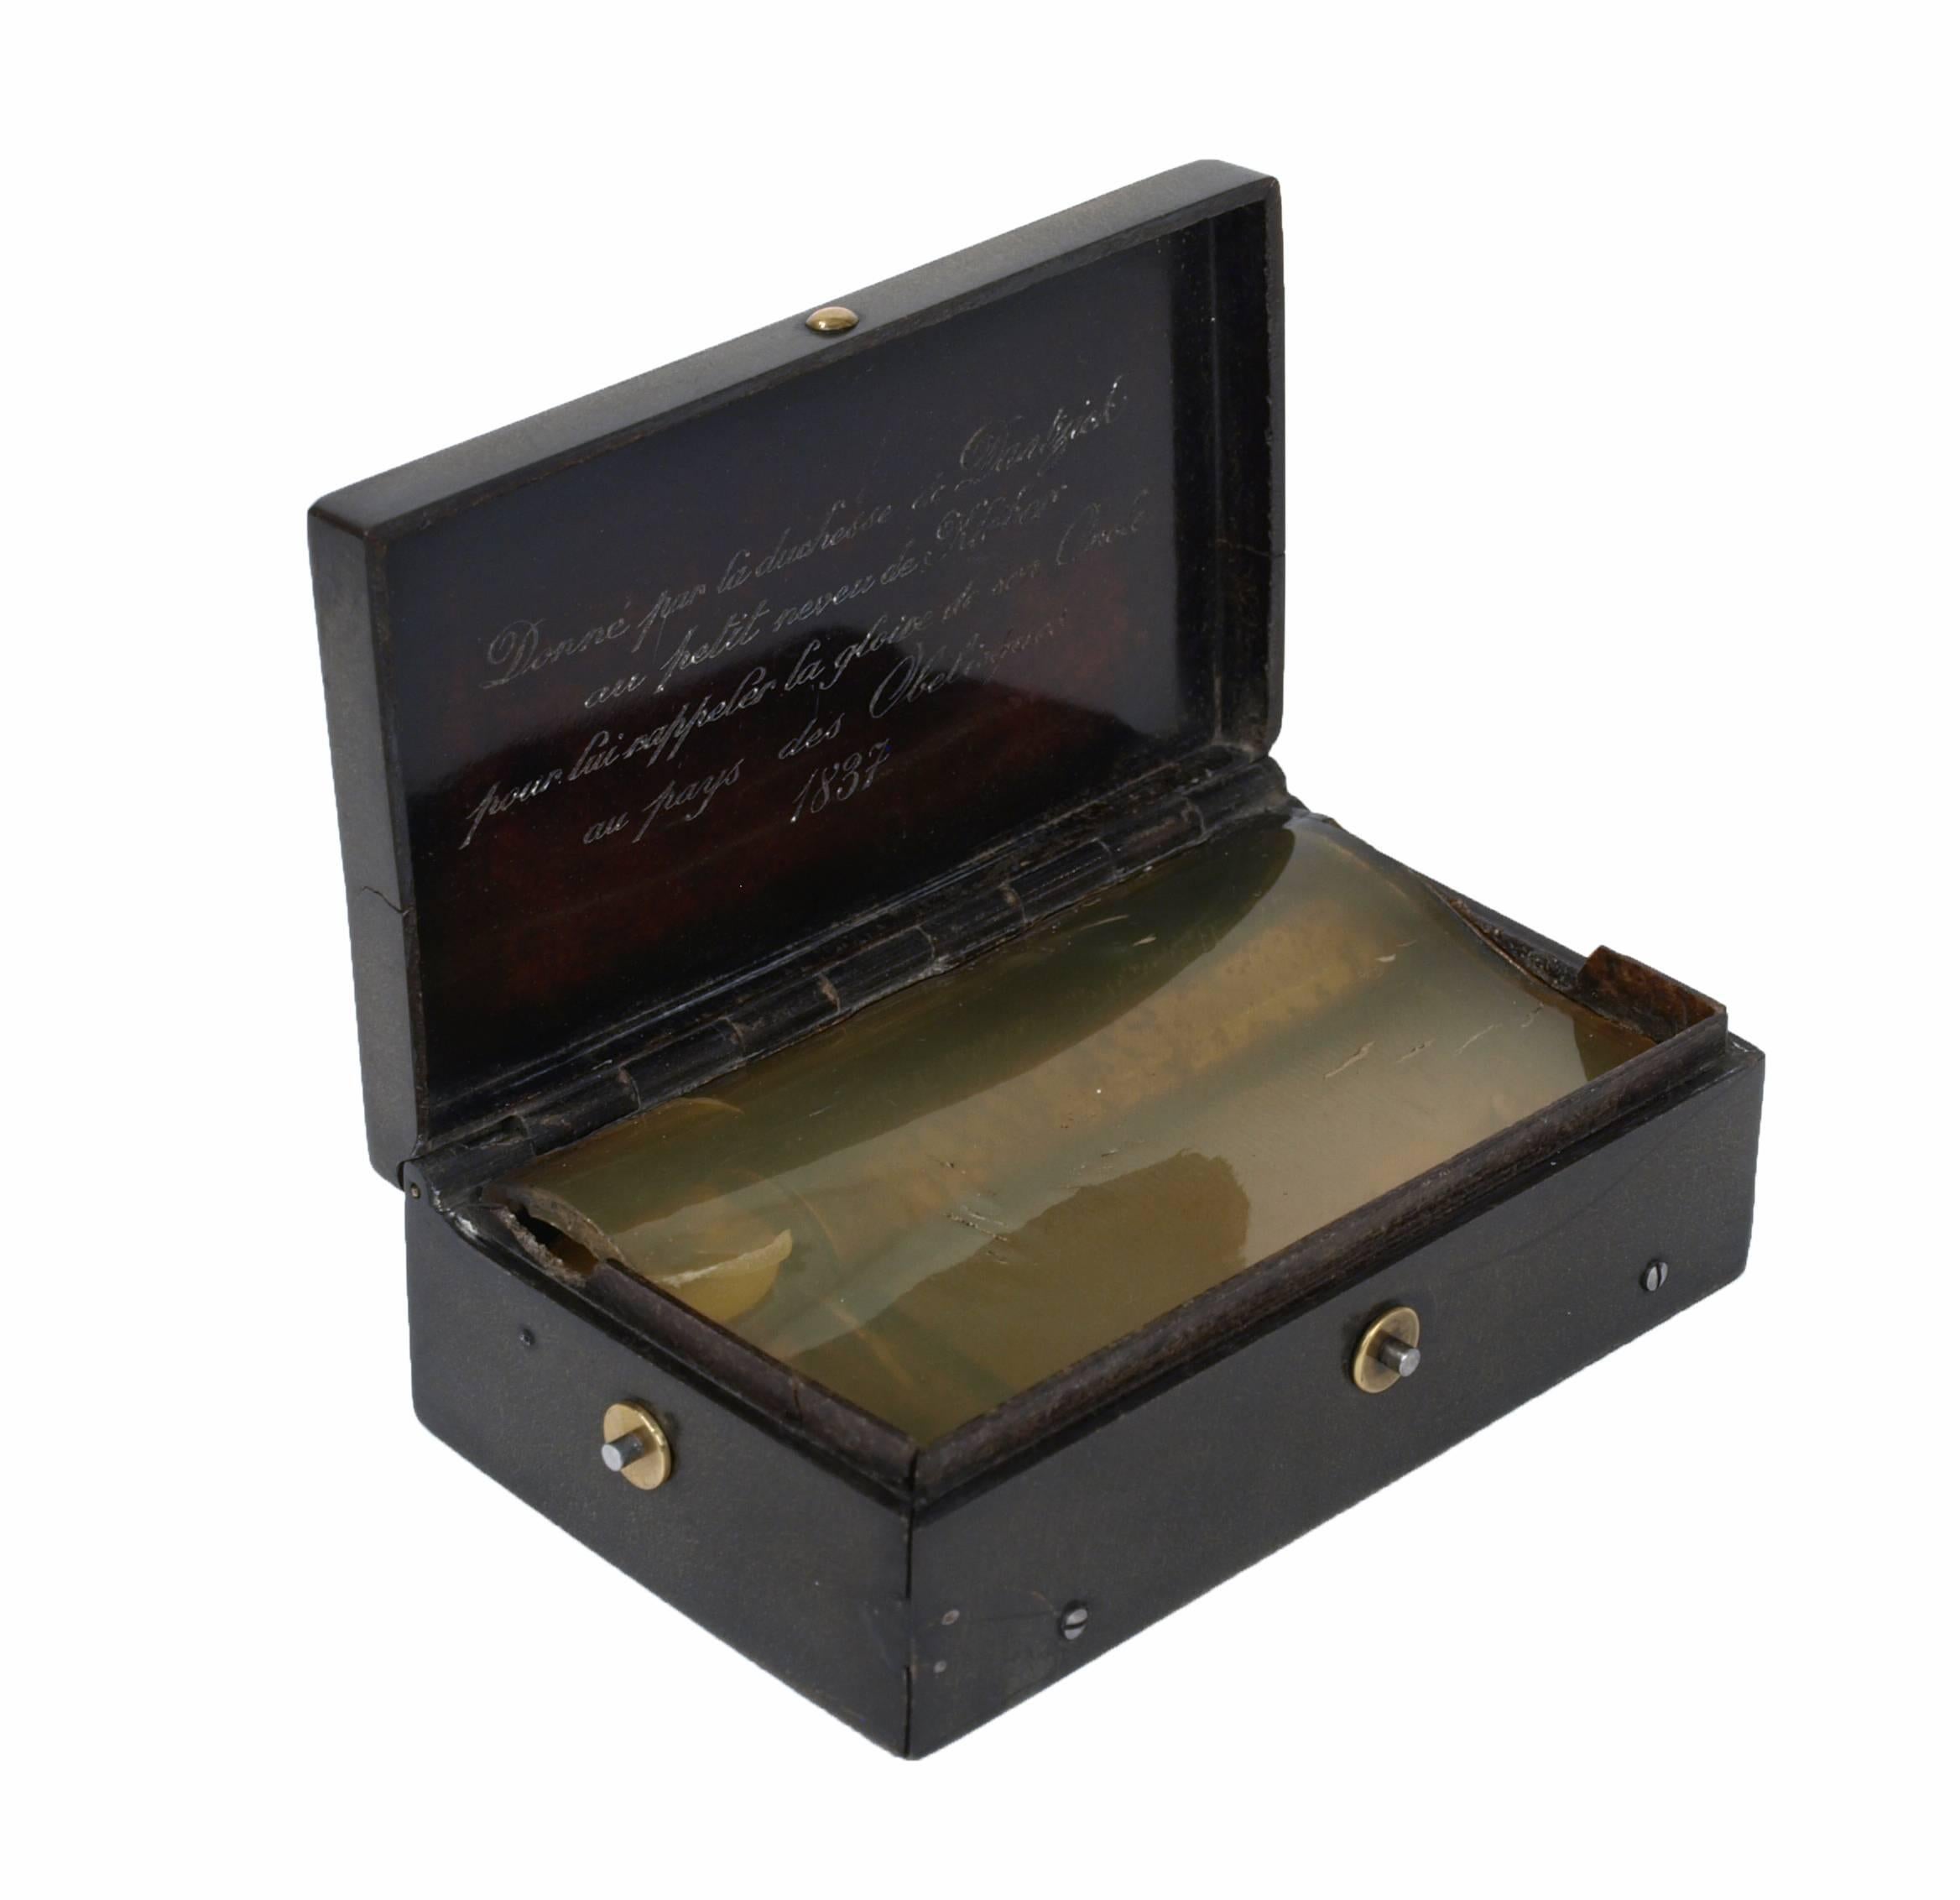 This finely engraved and inscribed tortoiseshell music box is a precious piece of French Revolution and Napoleonic history: given as a gift by the Duchess of Gdansk in 1837 to a nephew of the famous revolutionary general Kleber, the box features an